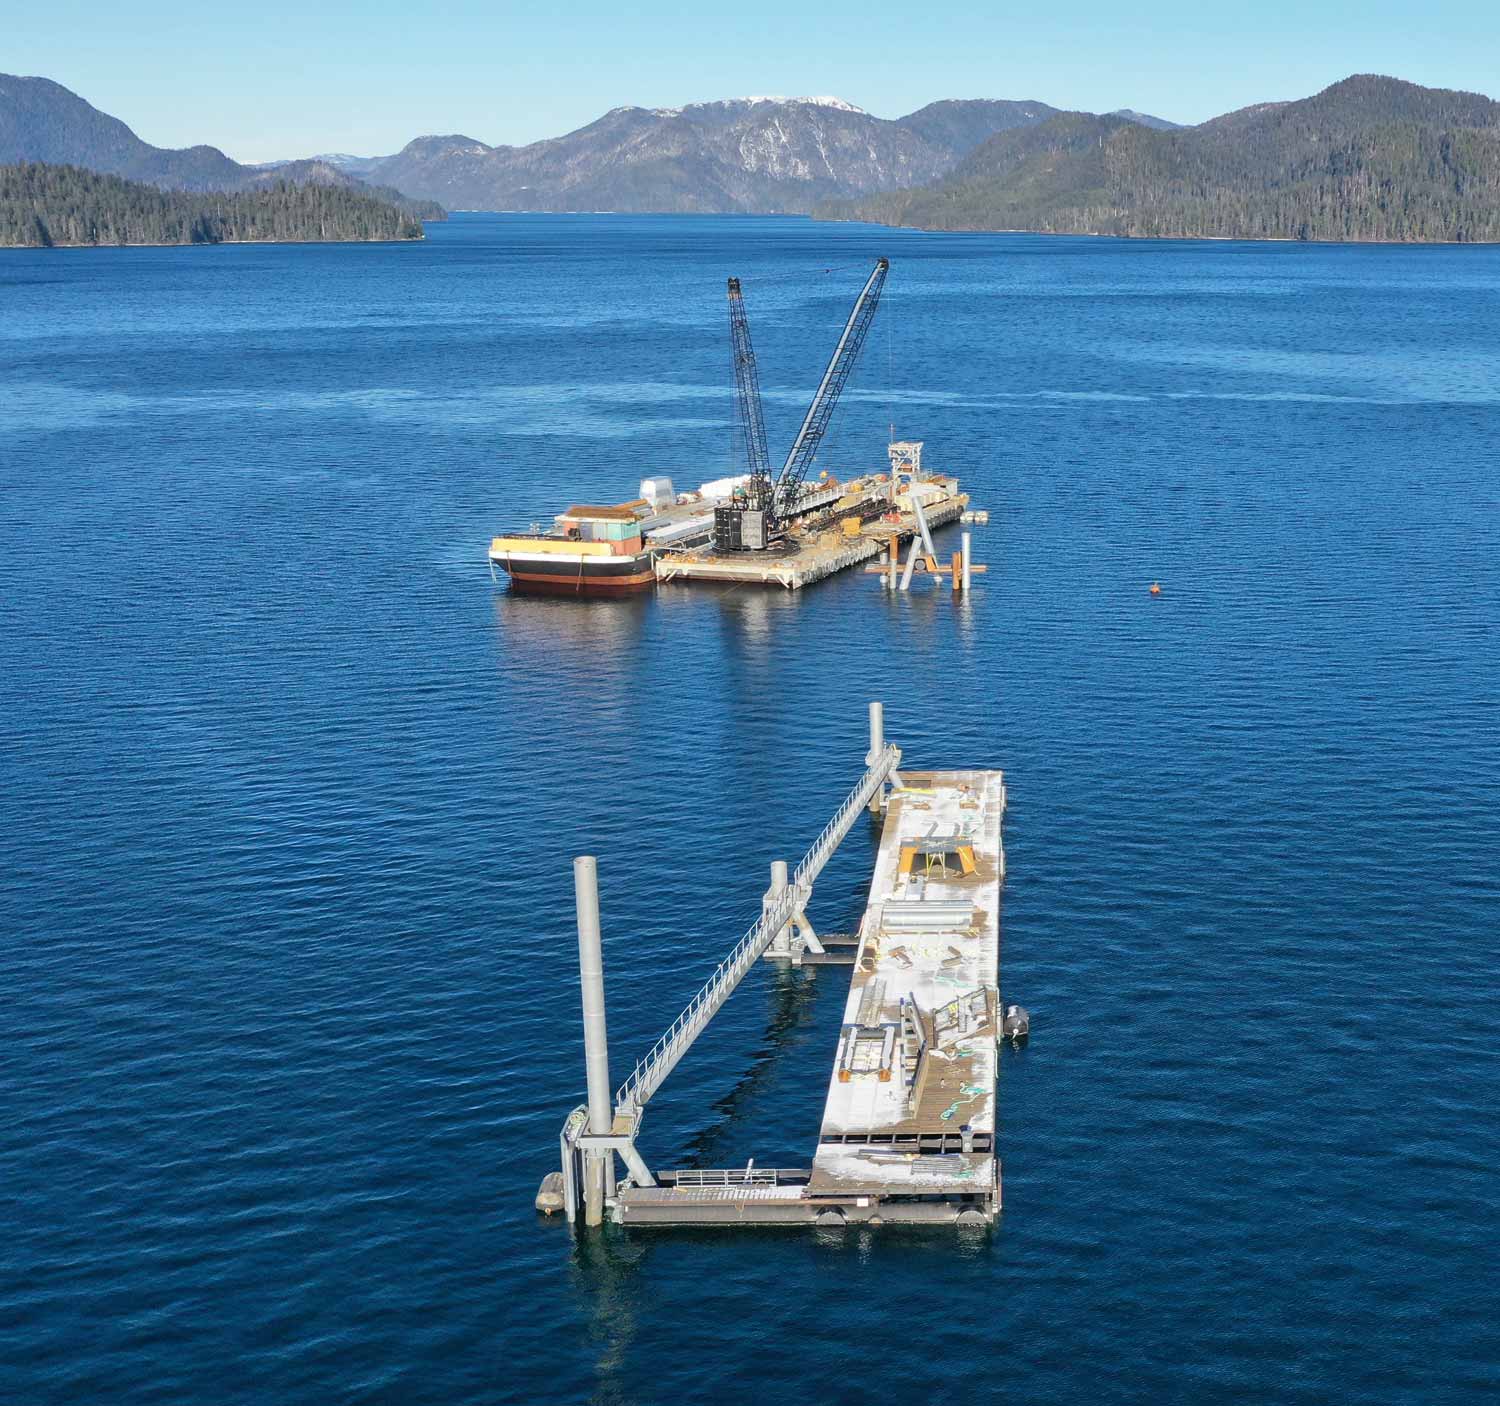 The Halibut Point dock expansion project in Sitka